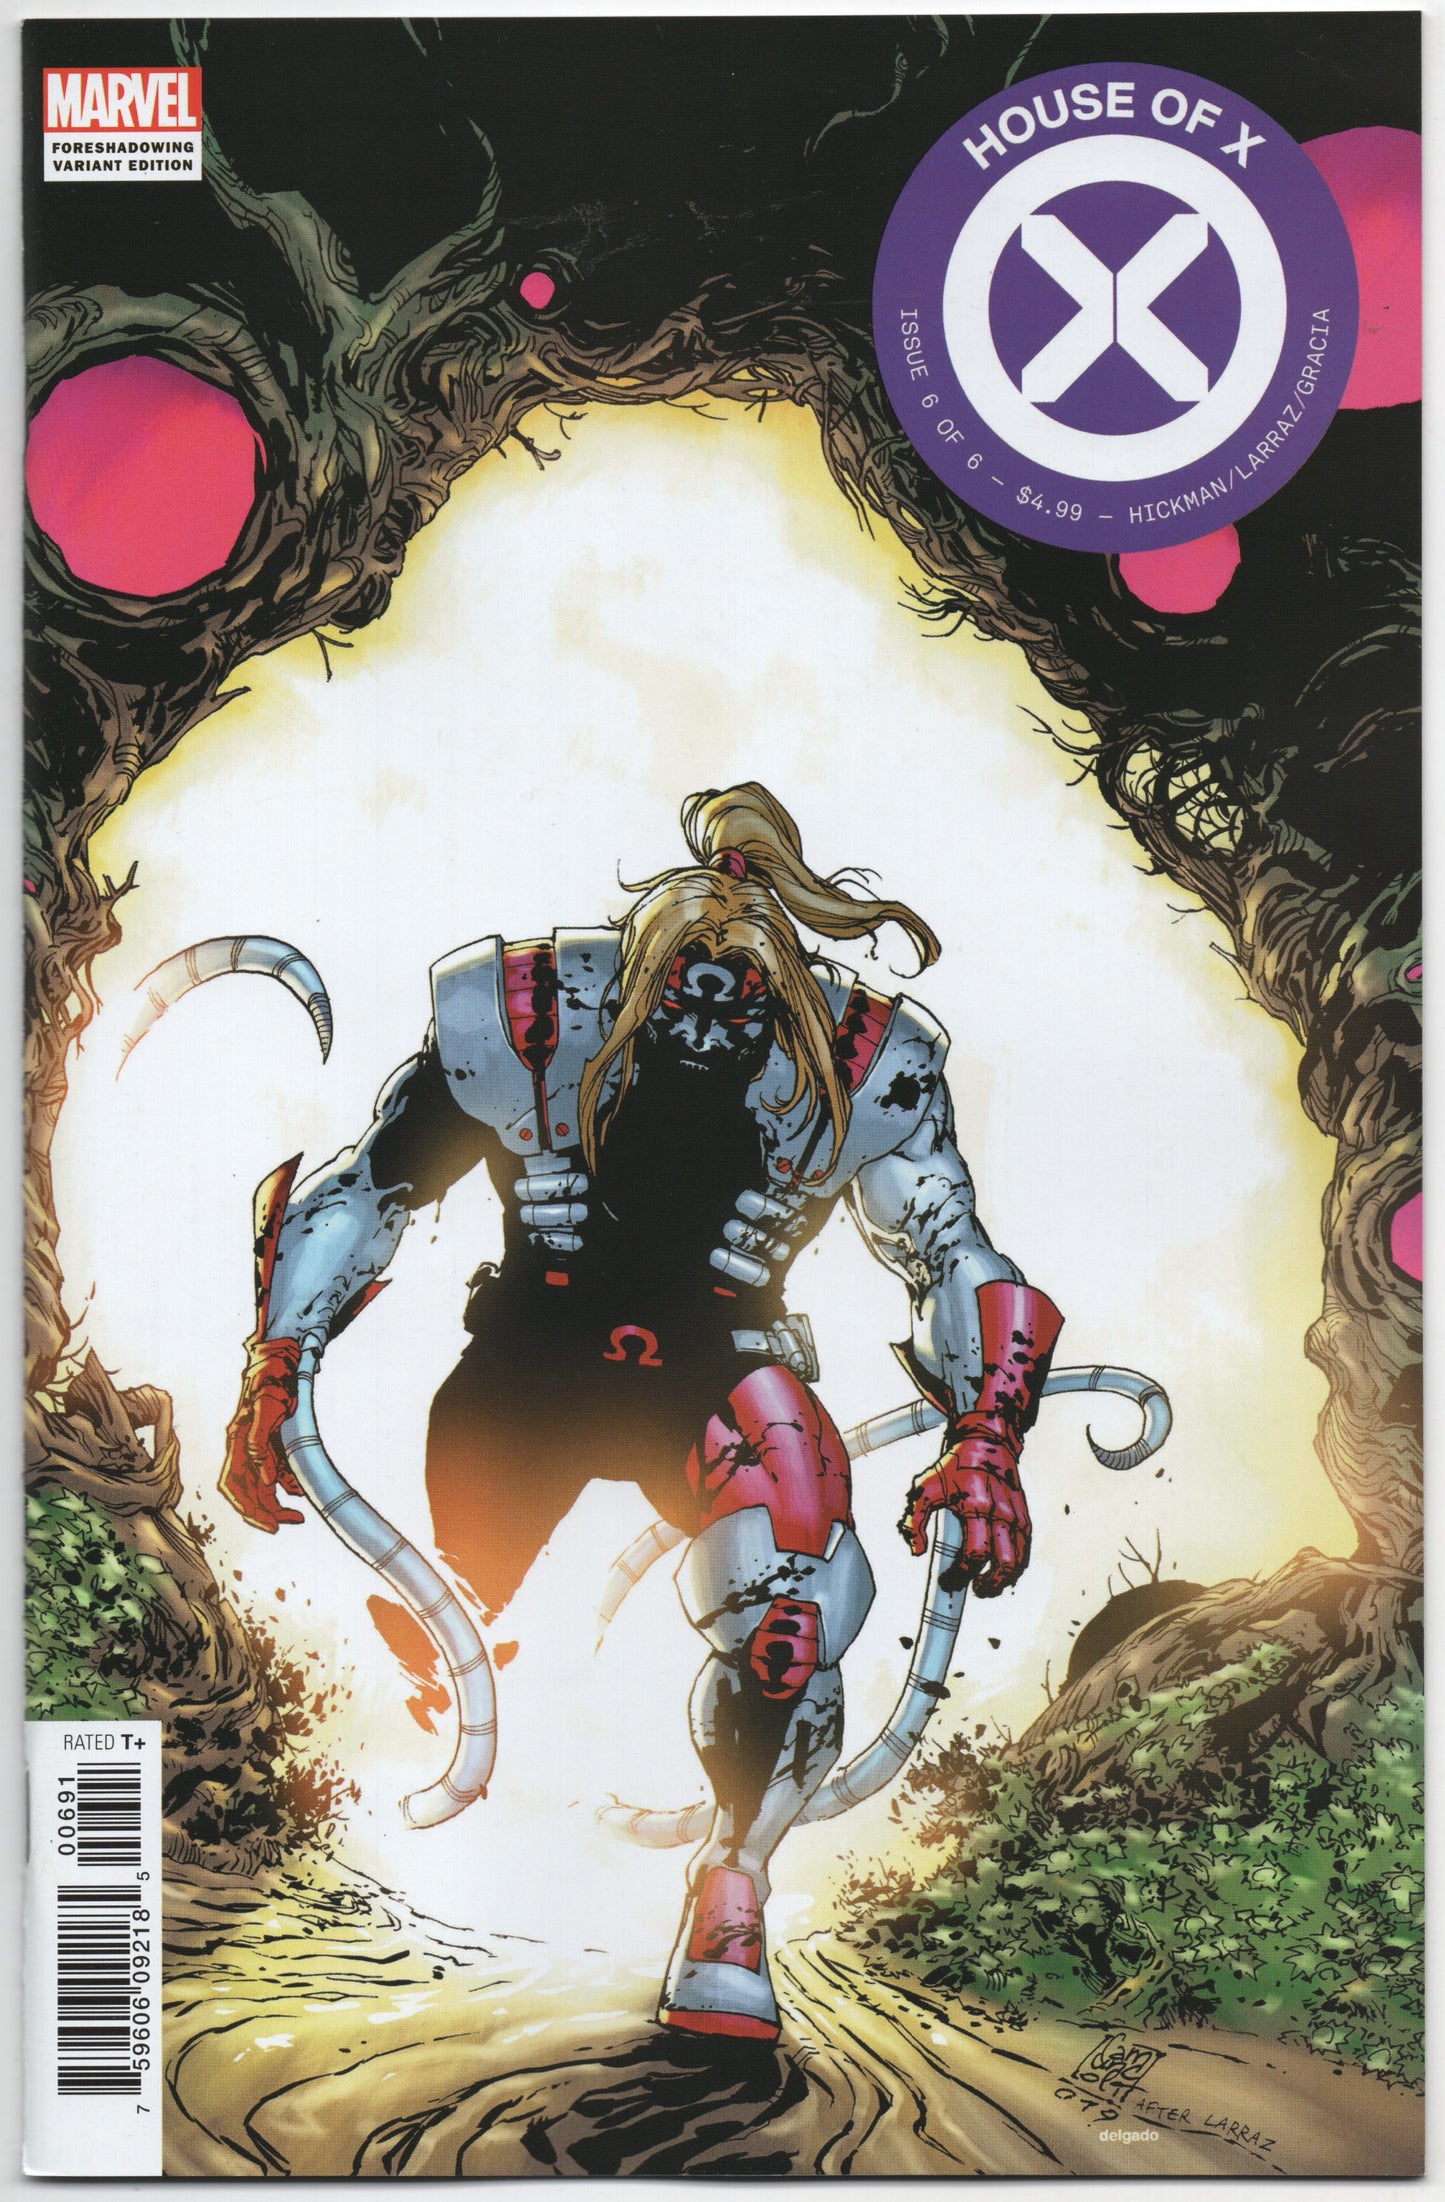 HOUSE OF X #6 D (OF 6) FORESHADOW Variant (10/02/2019) Marvel